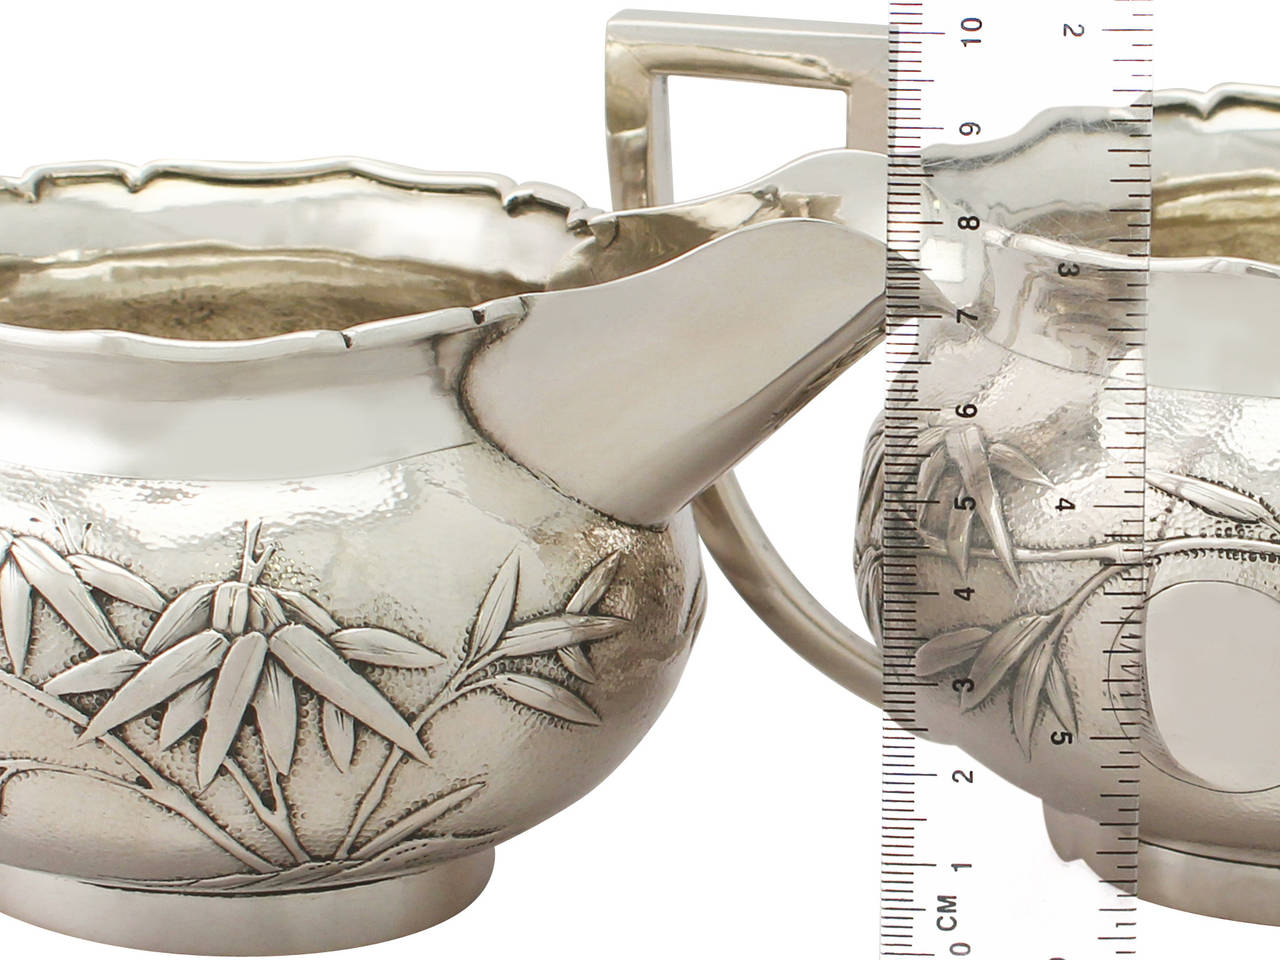 Early 20th Century 1900s Chinese Export Silver Cream Jug / Creamer and Sugar Bowl For Sale